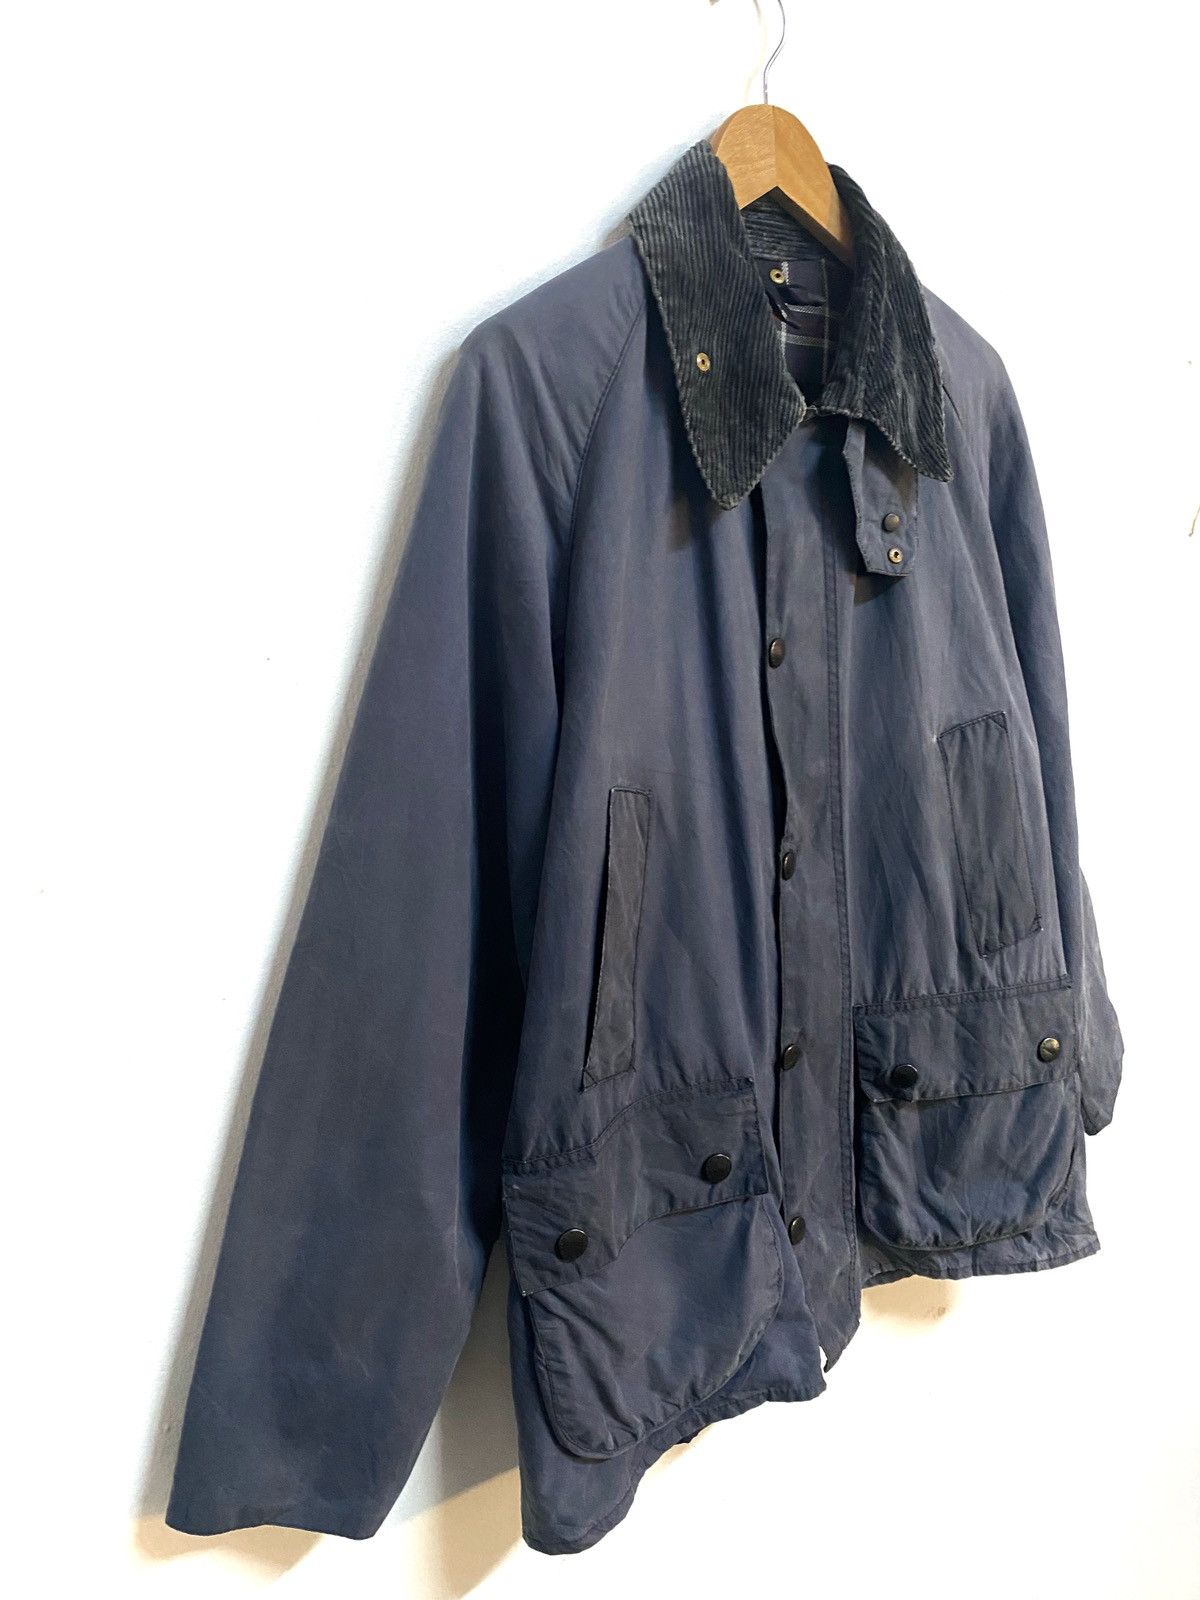 Barbour Classic Bedale A100 Wax Jacket Made in England - 4